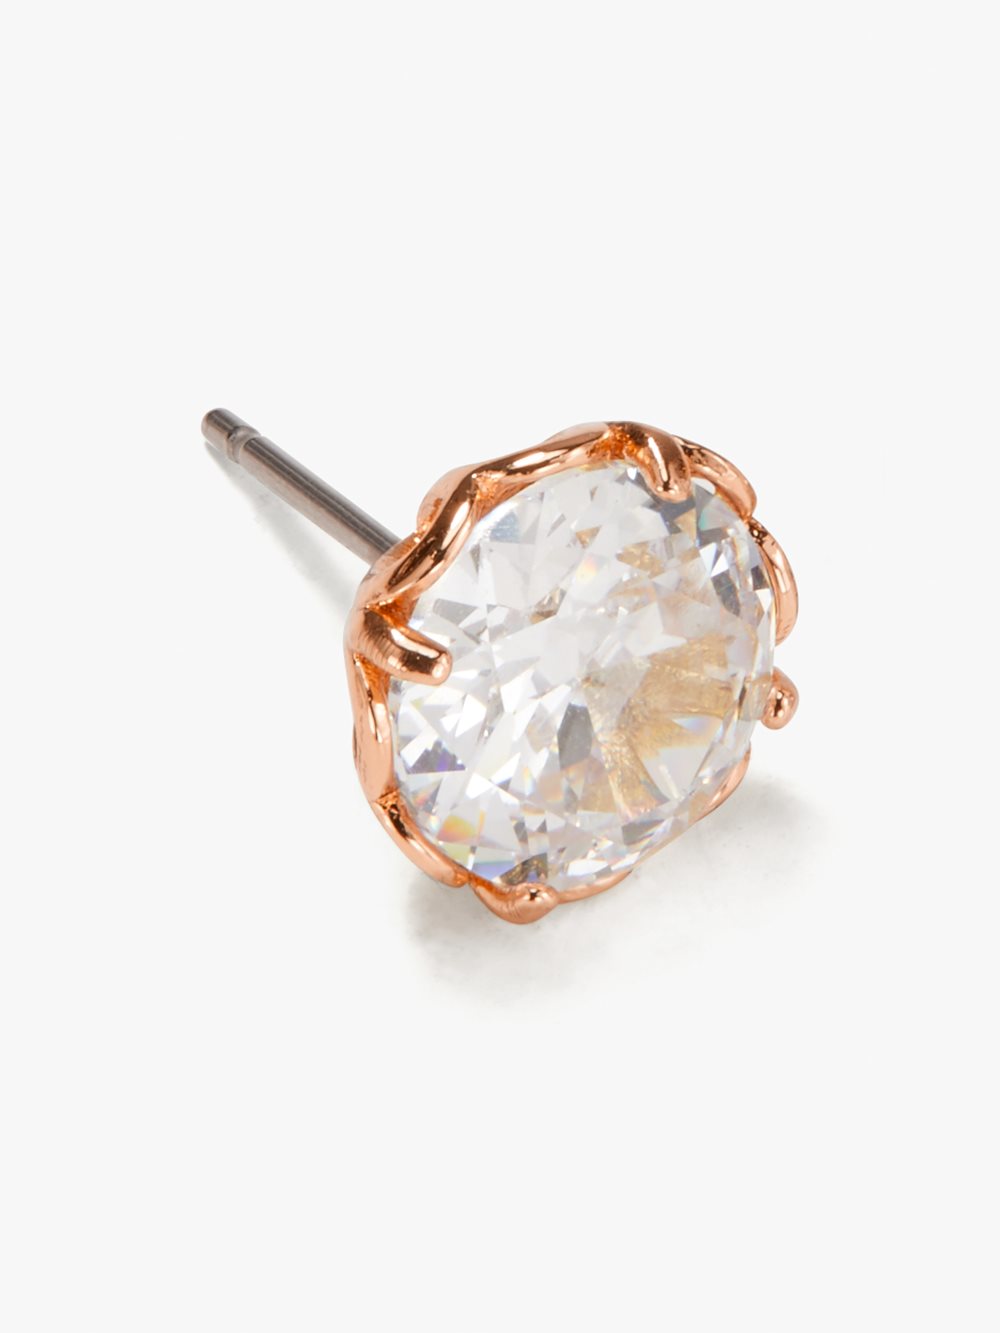 Women's clear/rose gold that sparkle round earrings | Kate Spade